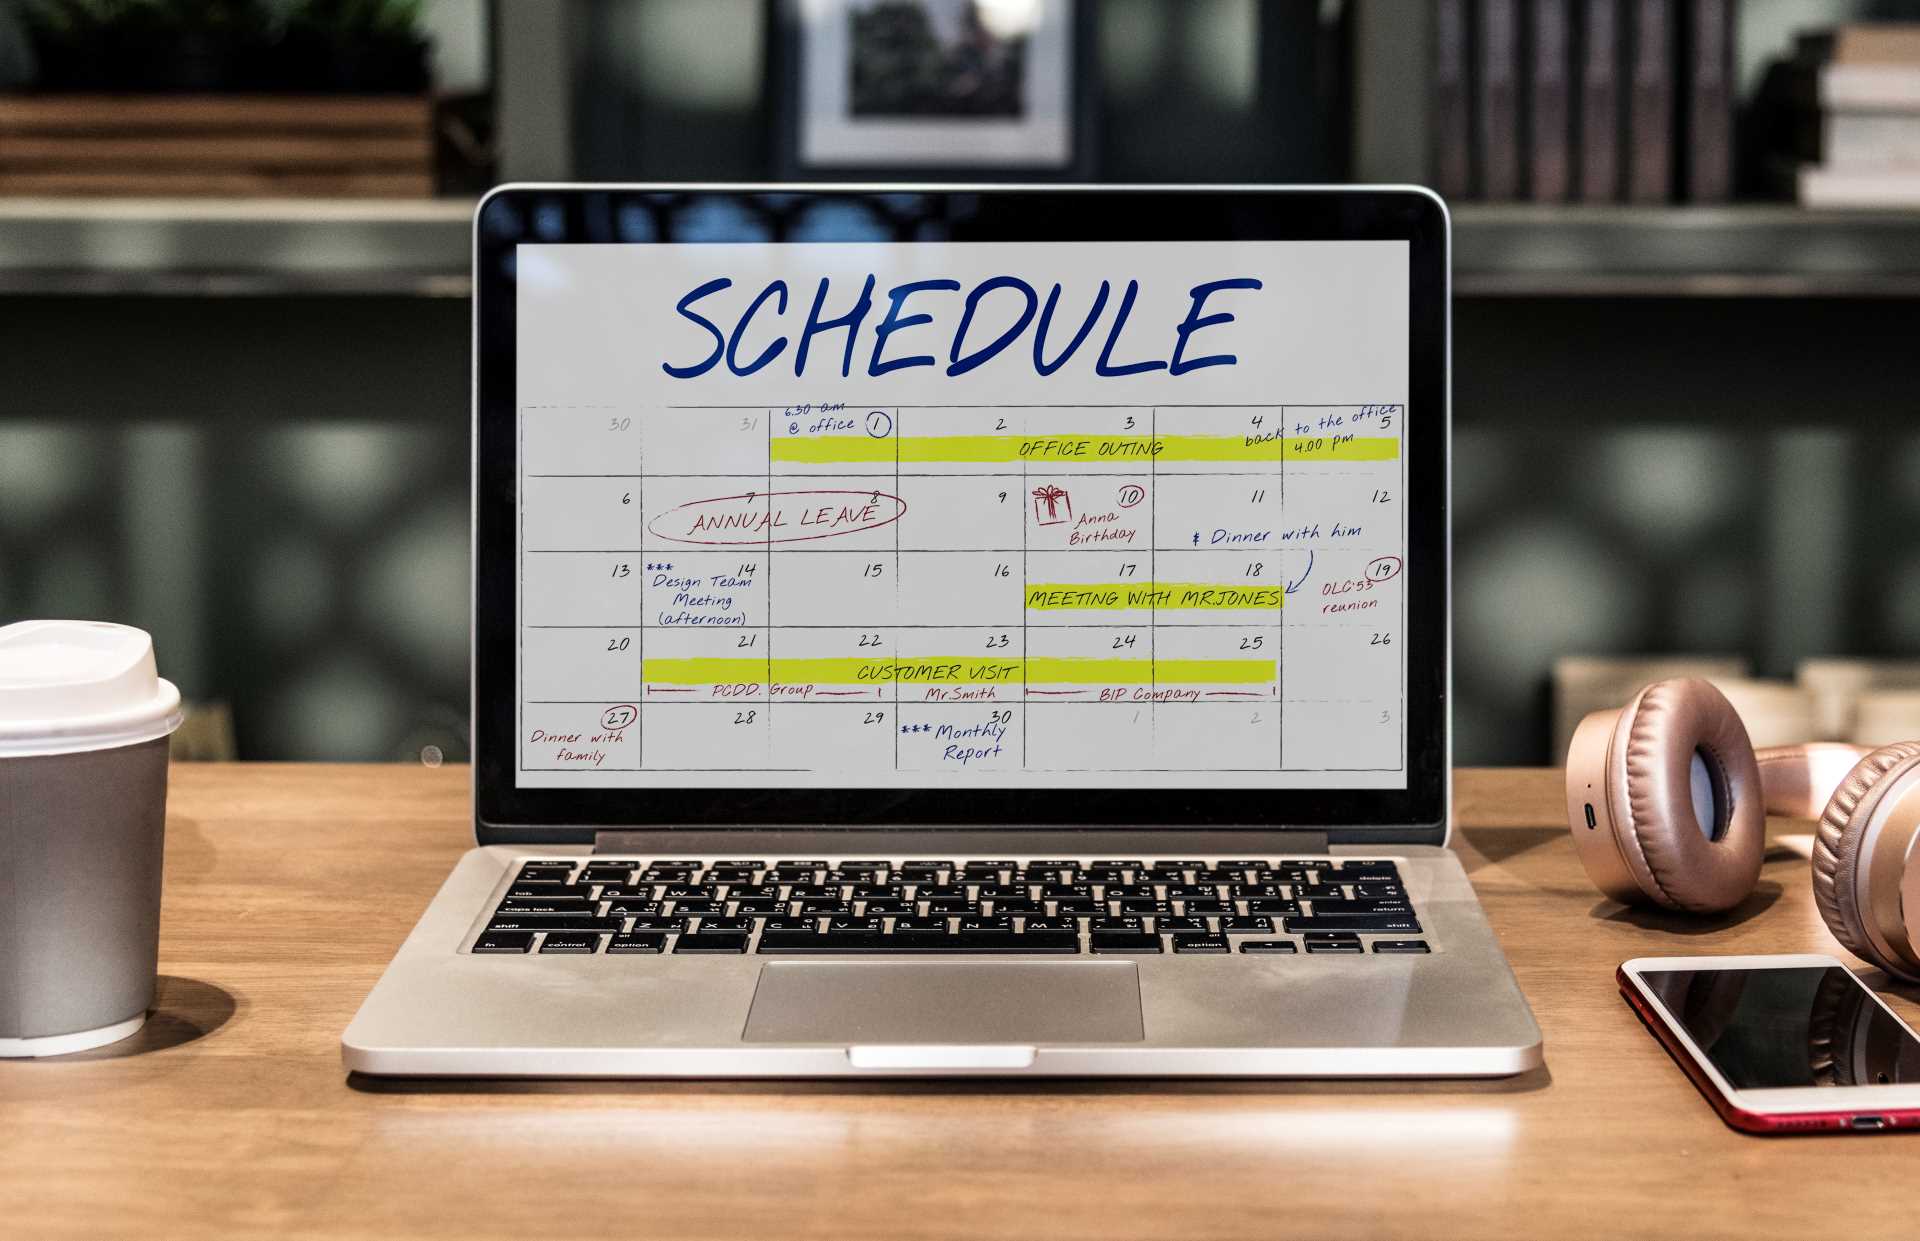 automated scheduling software, laptop with a calendar schedule